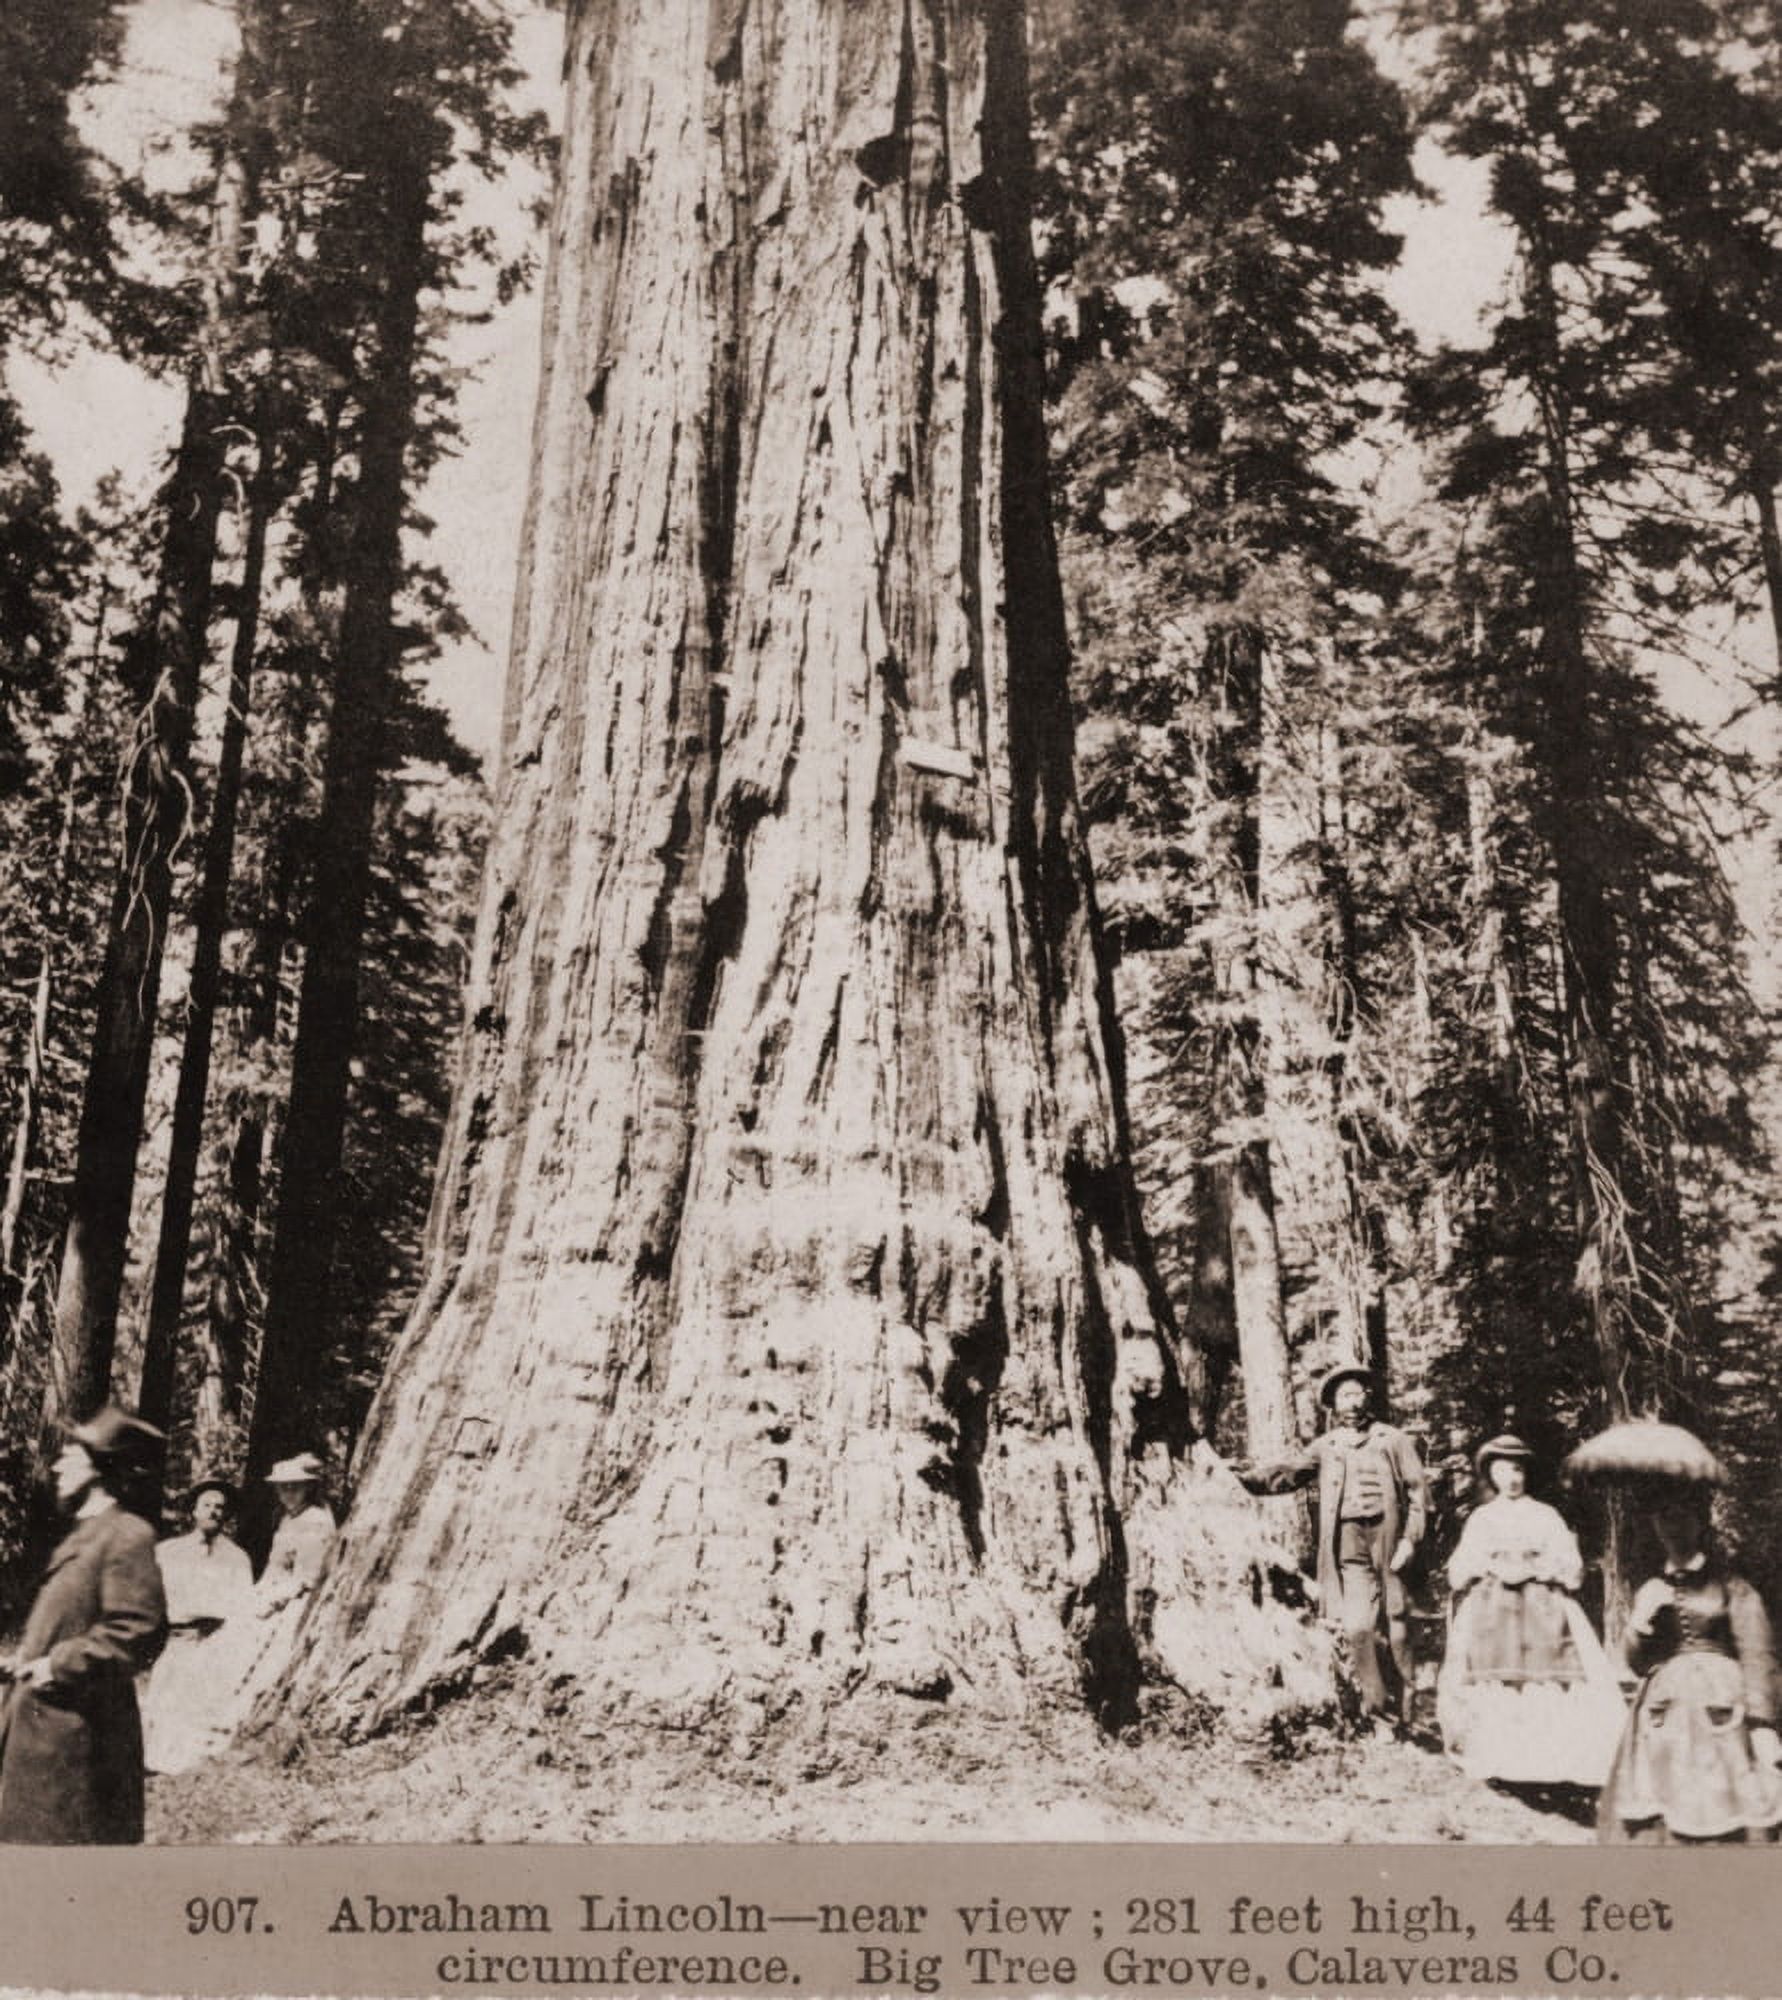 Men And Women Stand Beneath A Mammoth Sequoia Named Abraham Lincoln In The Big Tree Grove Of Calaveras County History (18 x 24) - image 1 of 1